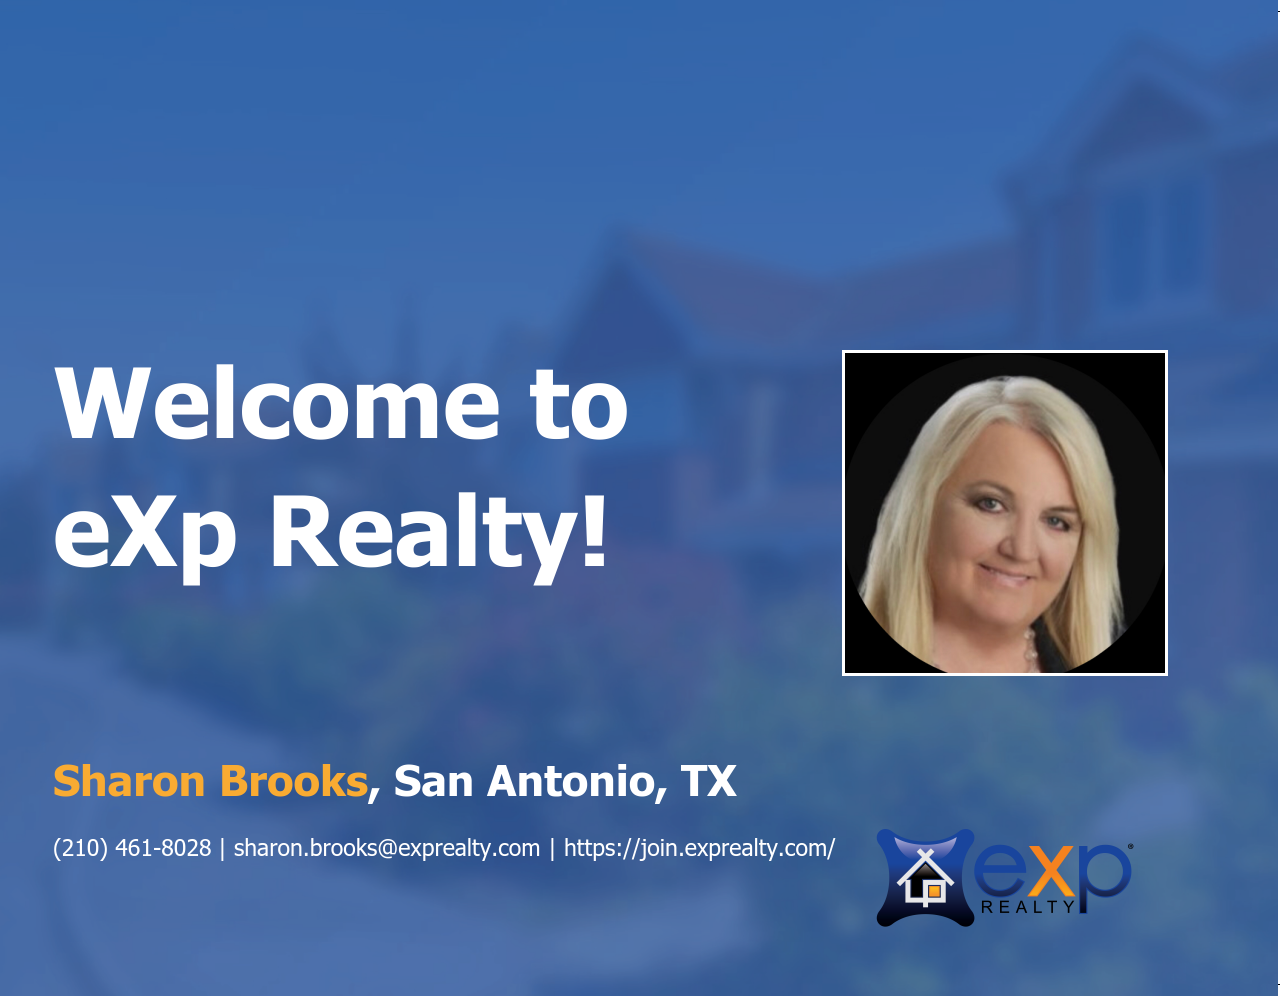 Welcome to eXp Realty Sharon Brooks!